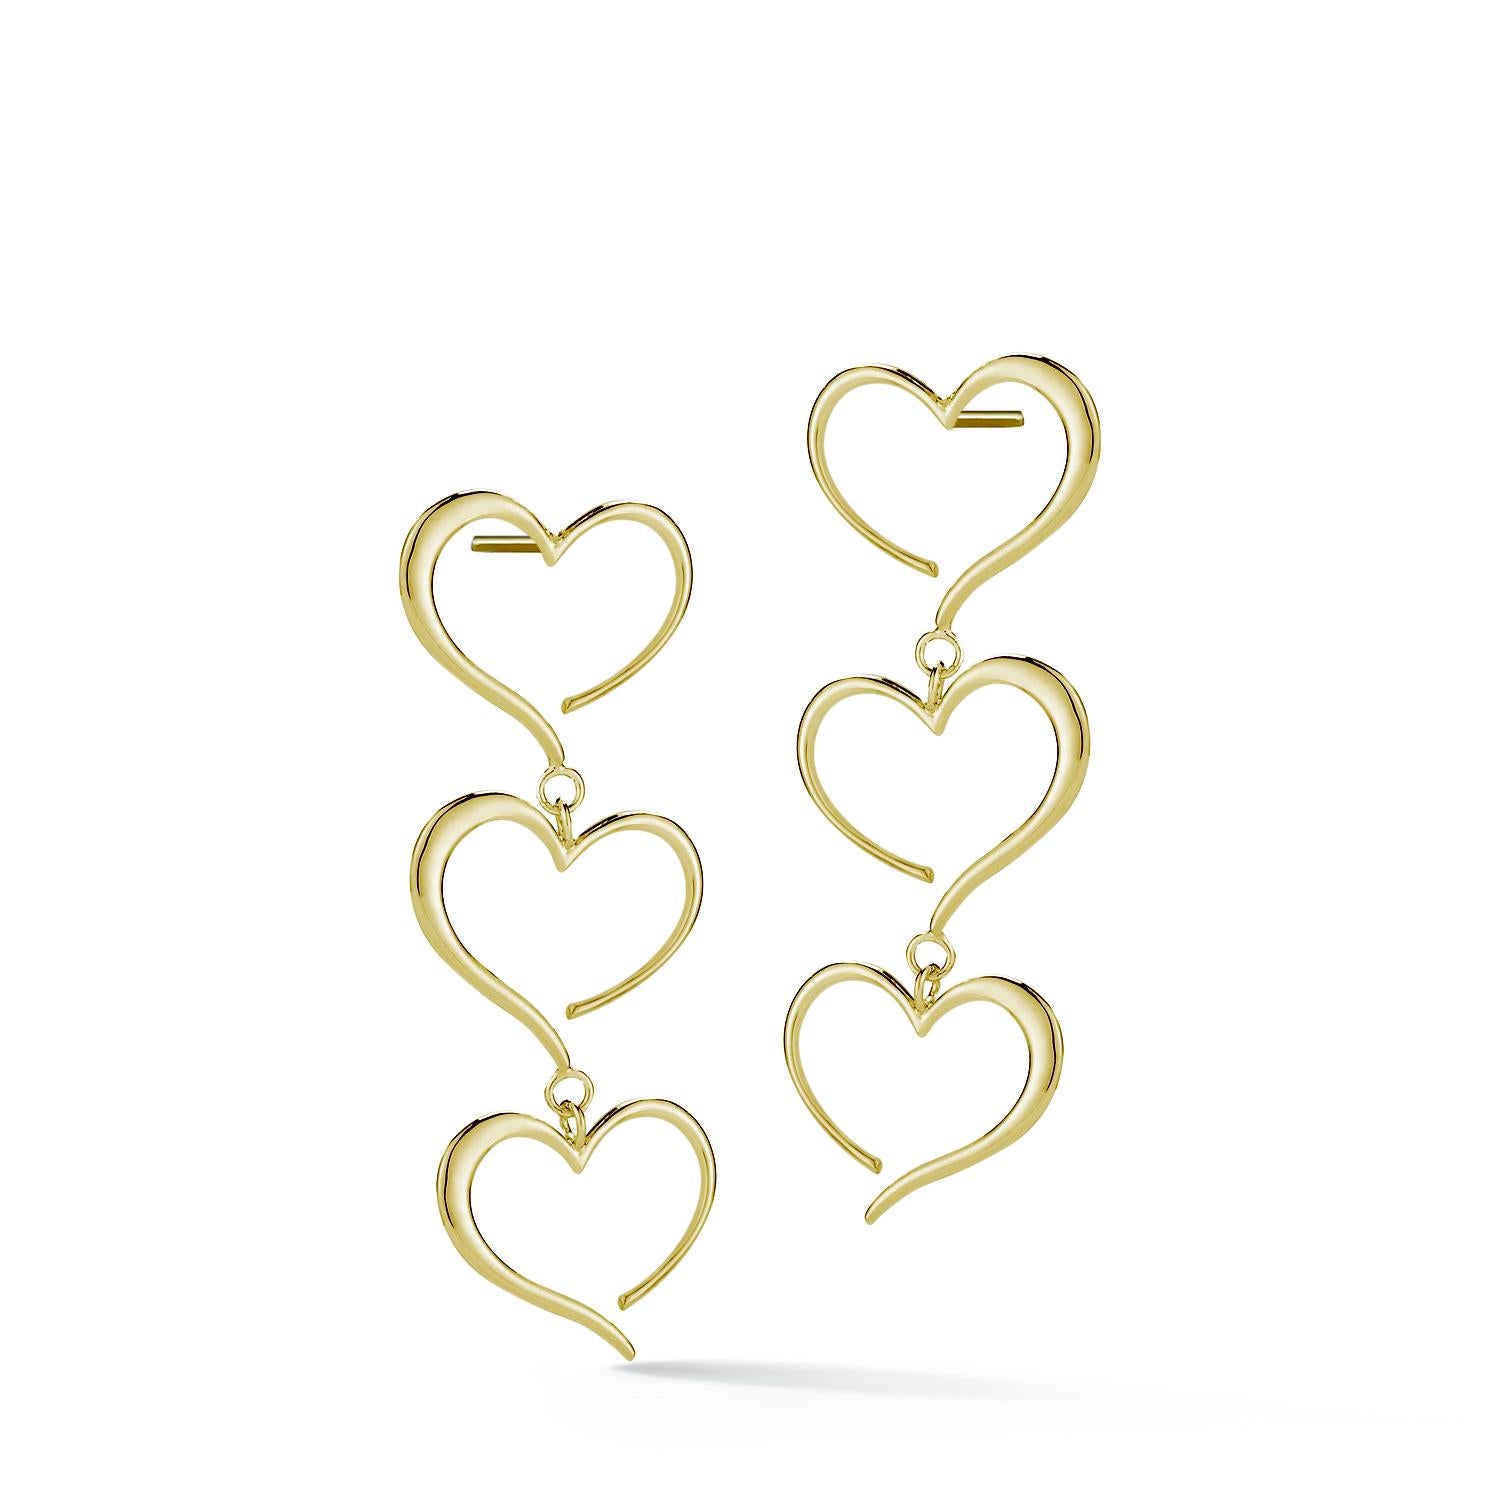 Designed in NYC

.925 Sterling Silver Triple Heart Dangle Earrings. On the road to charting your own path, the only rule is to follow your heart. Triple heart dangle earrings:

.925 sterling silver 
High-polish finish
Light-weight 
3 x 20 mm 3D